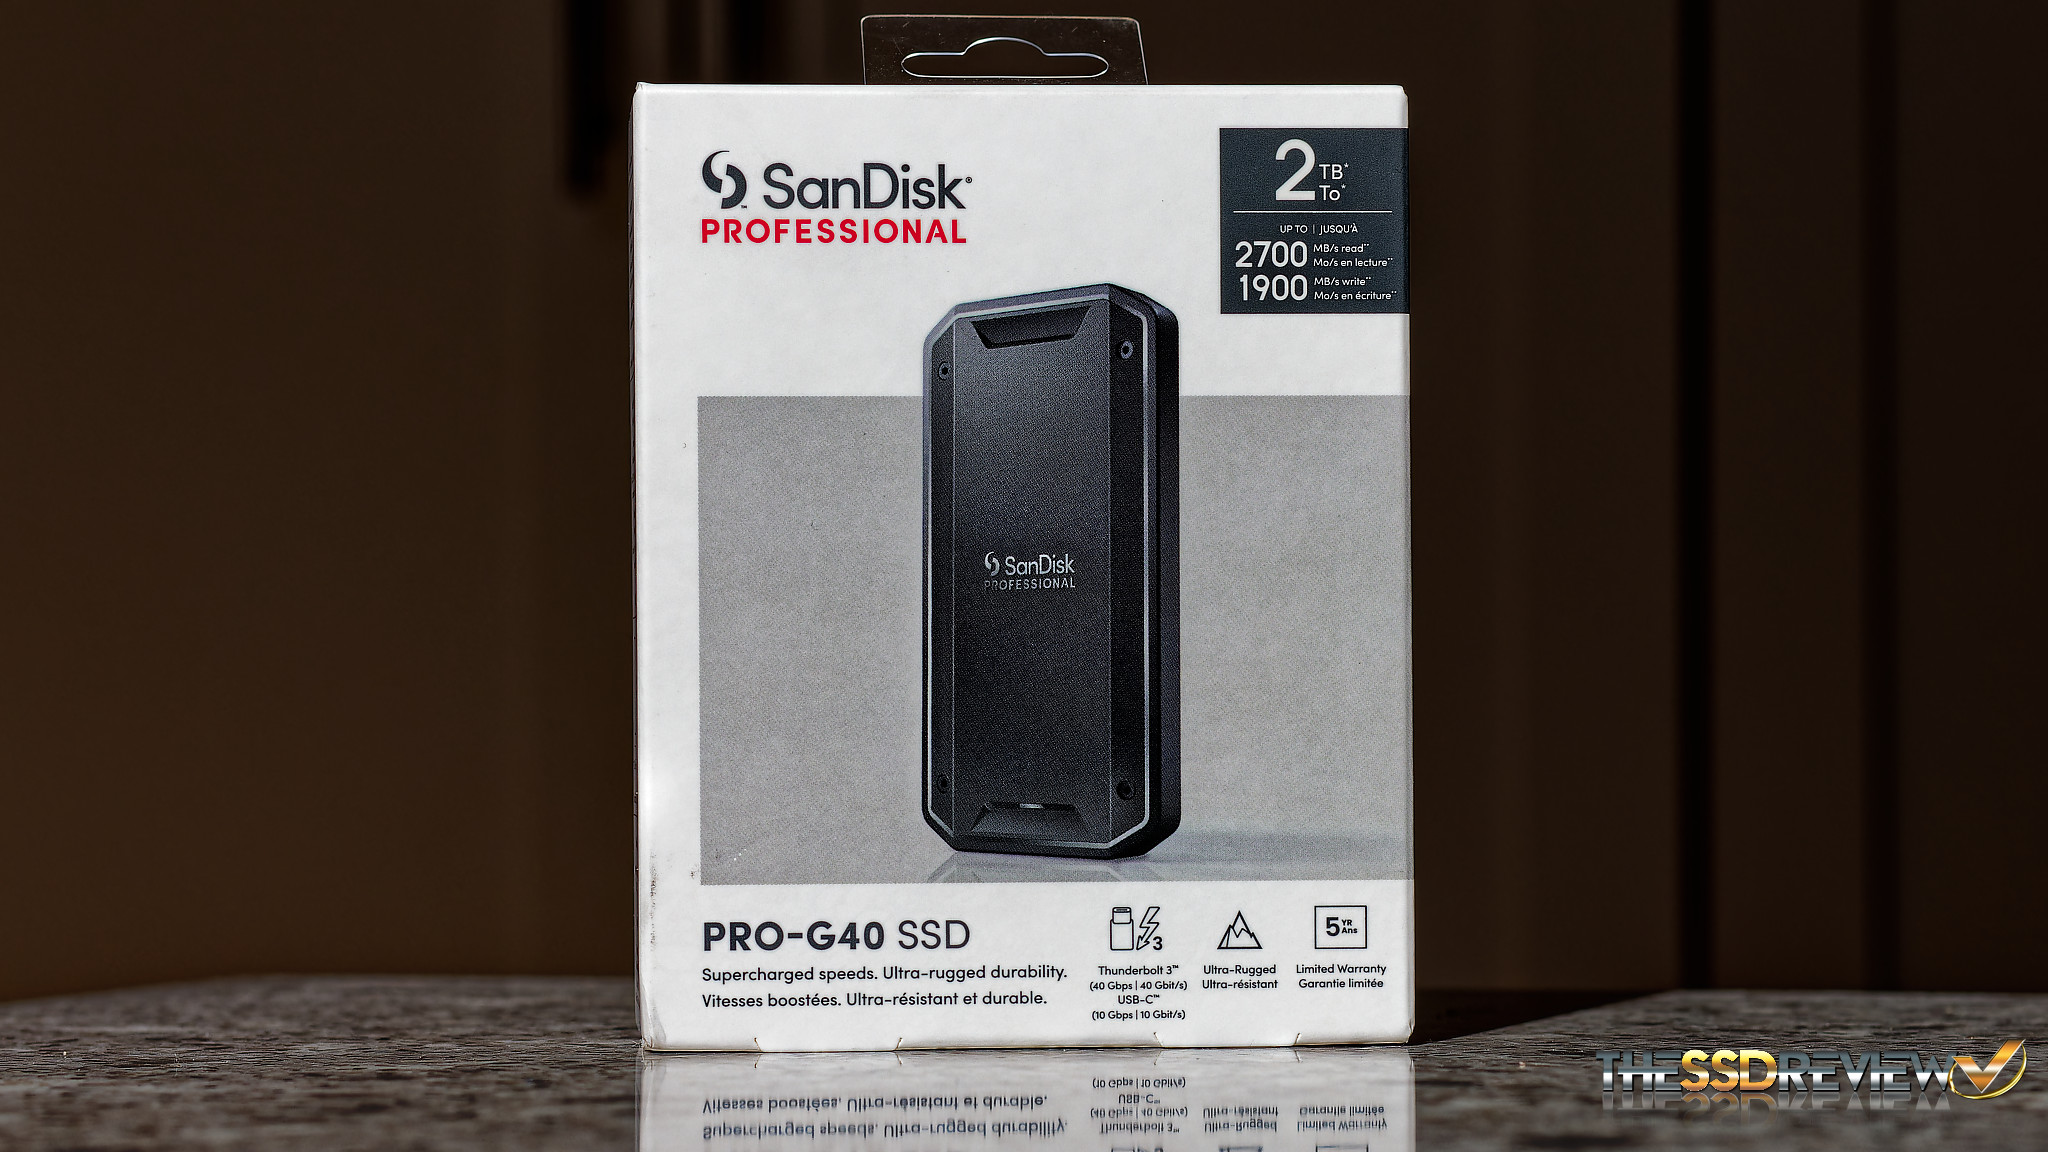 SanDisk Pro G40 SSD Review: specs, performance, cost